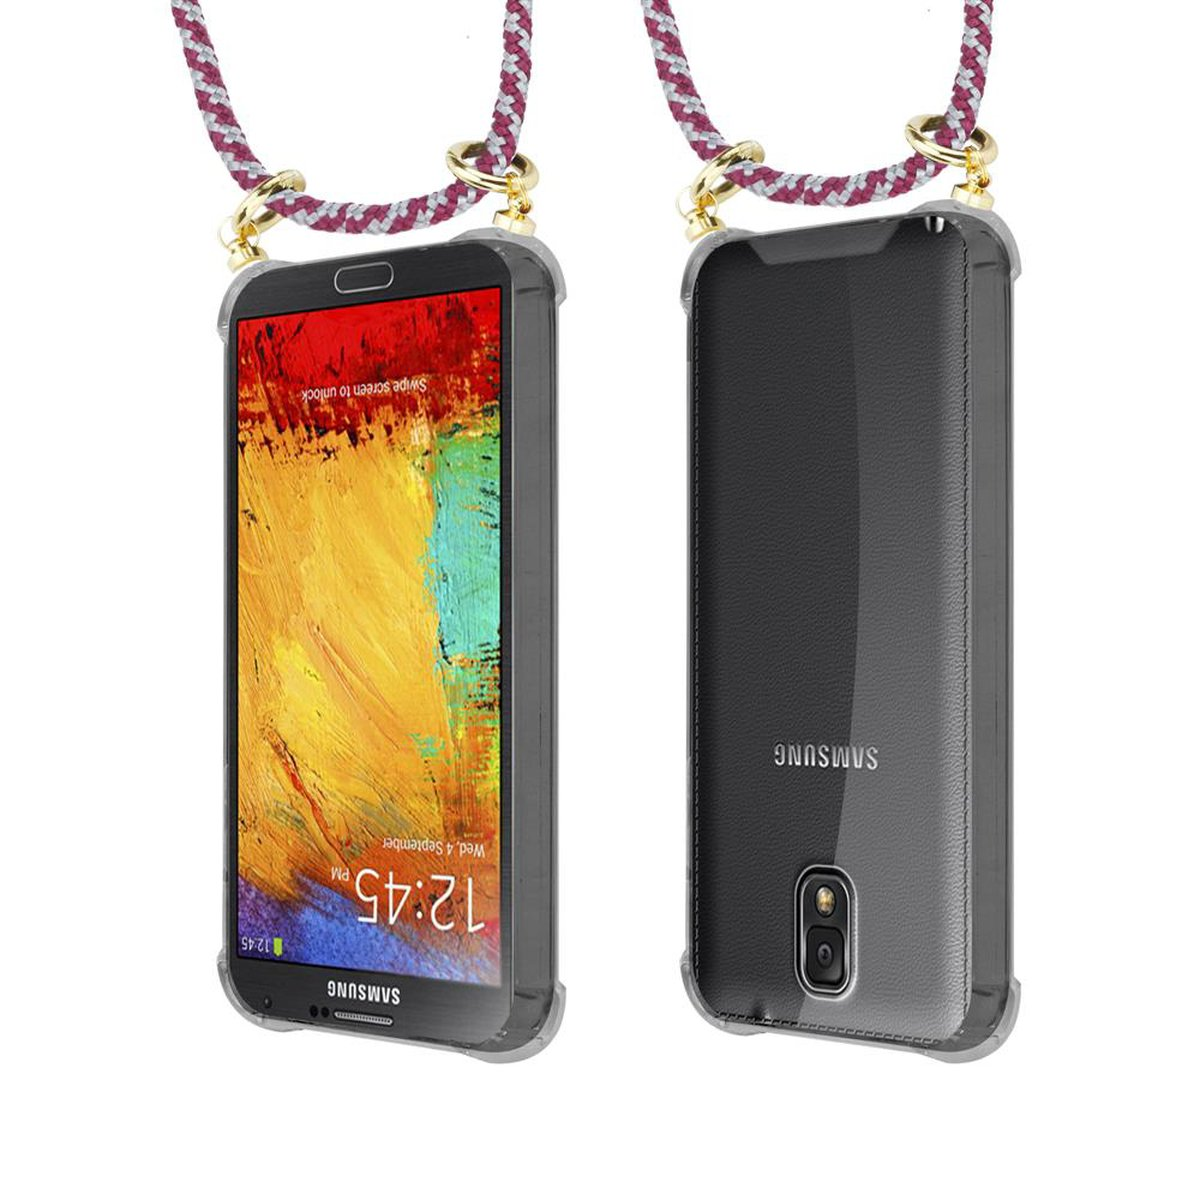 CADORABO Handy Kette mit Ringen, abnehmbarer 3, Band Kordel Gold NOTE ROT und Samsung, Hülle, Backcover, WEIß Galaxy